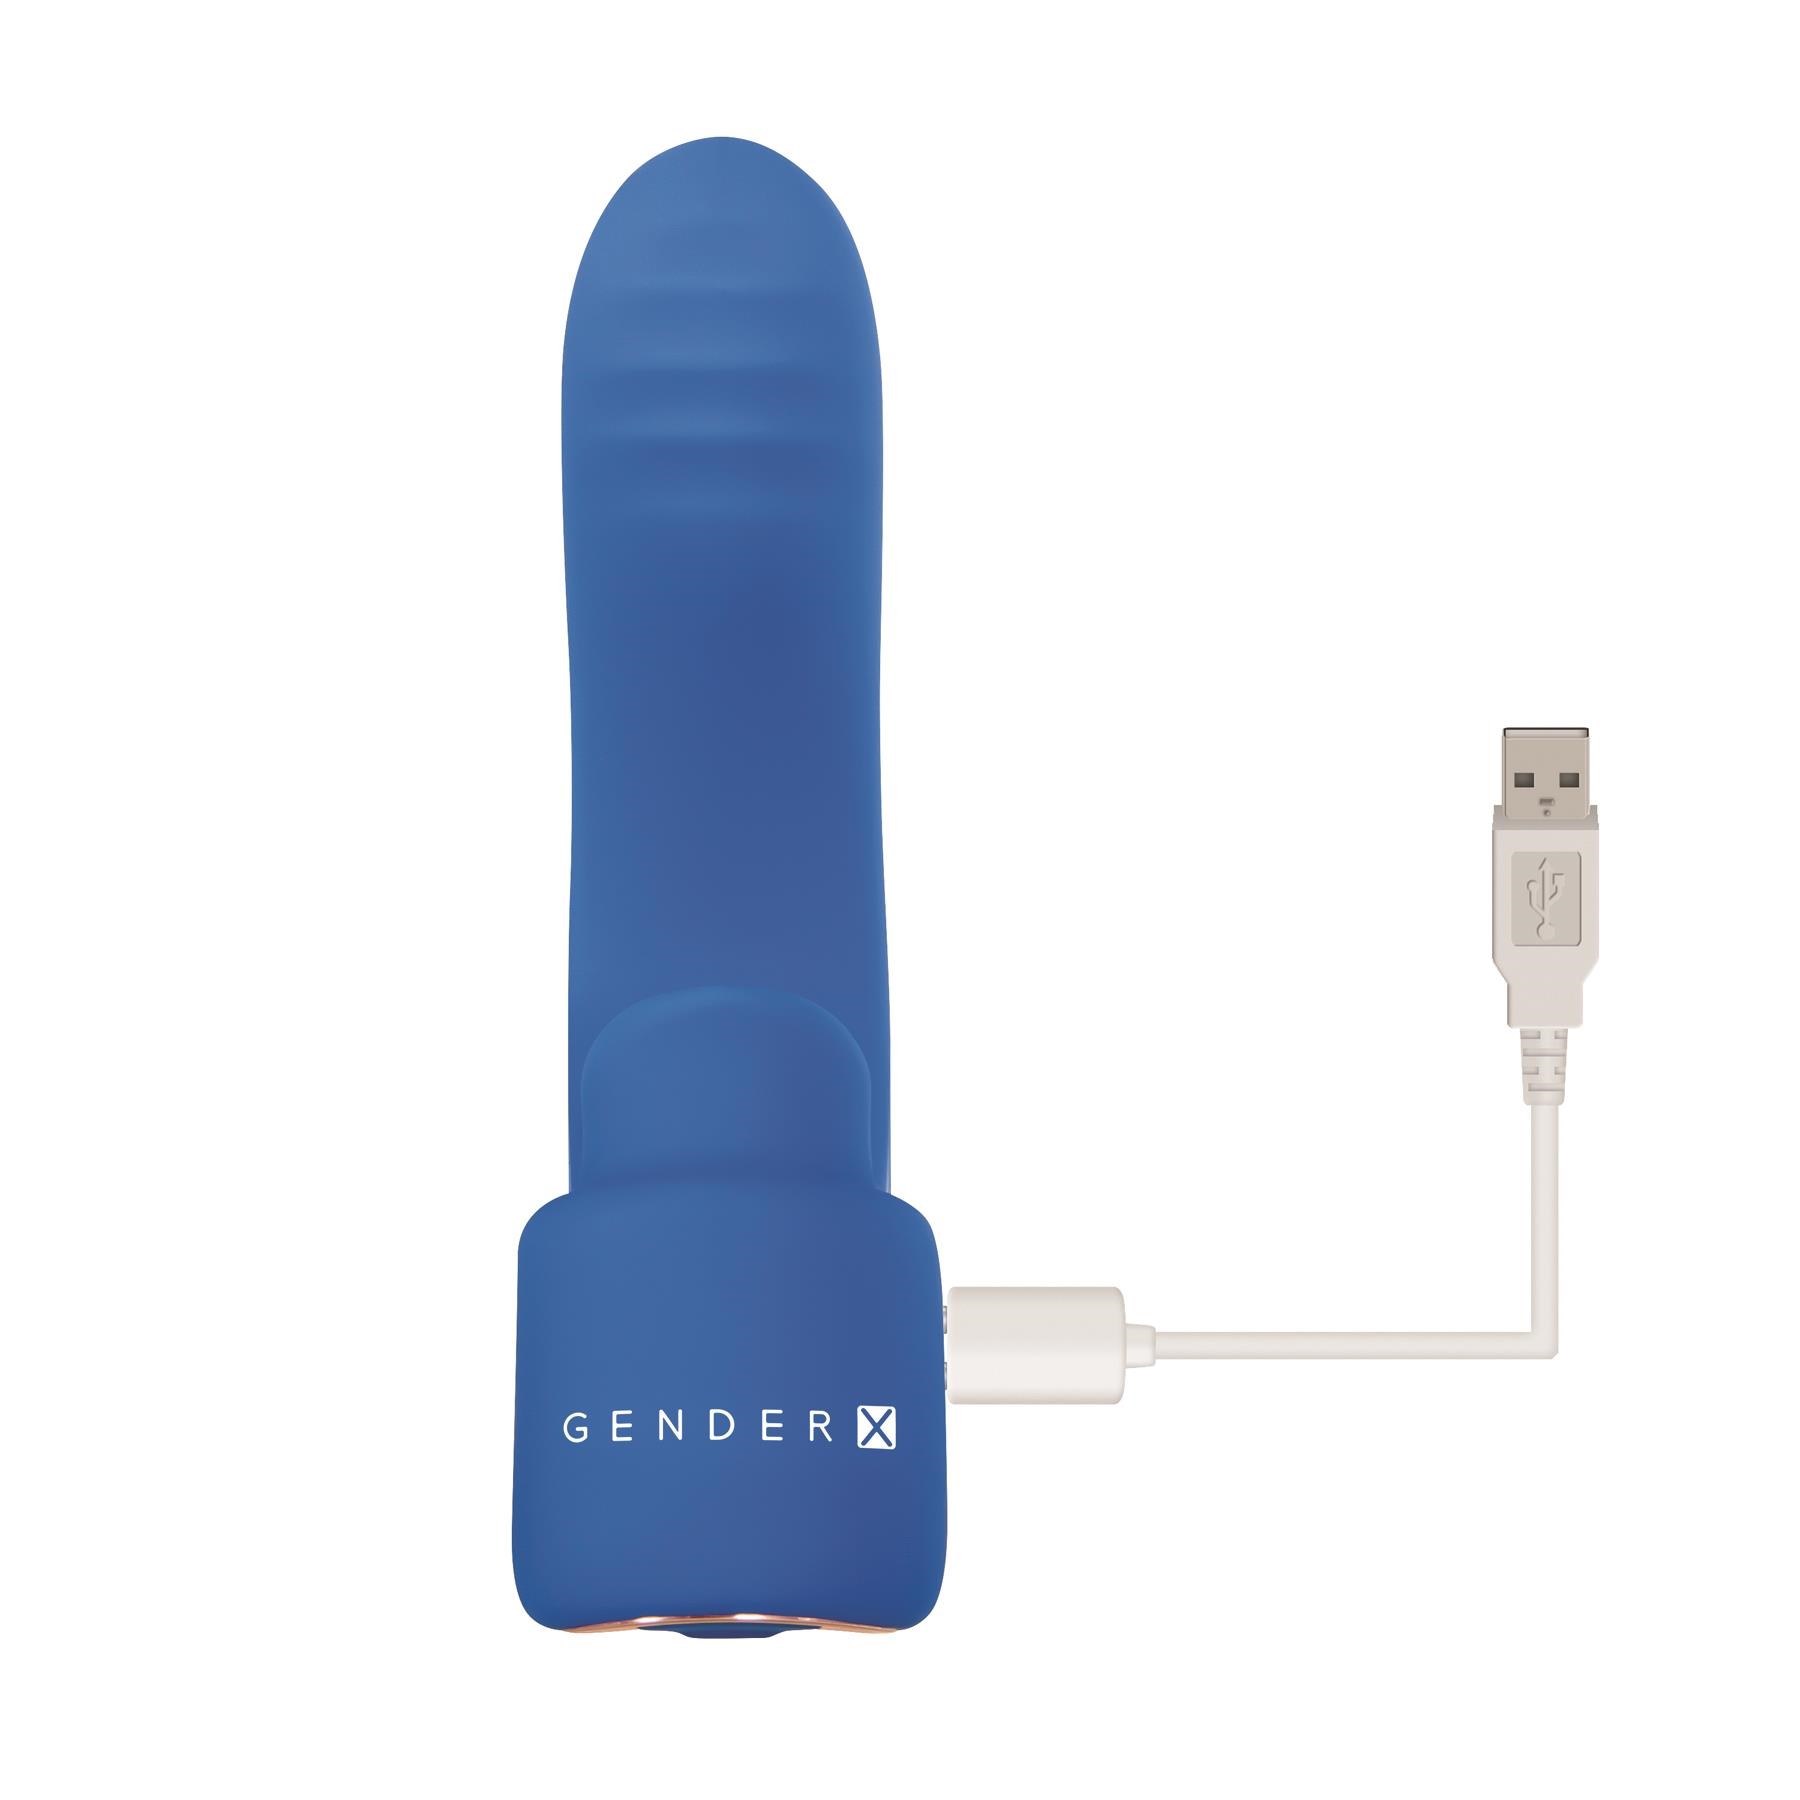 Flick It Rechargeable Finger Vibrator - Showing Where charger is Placed